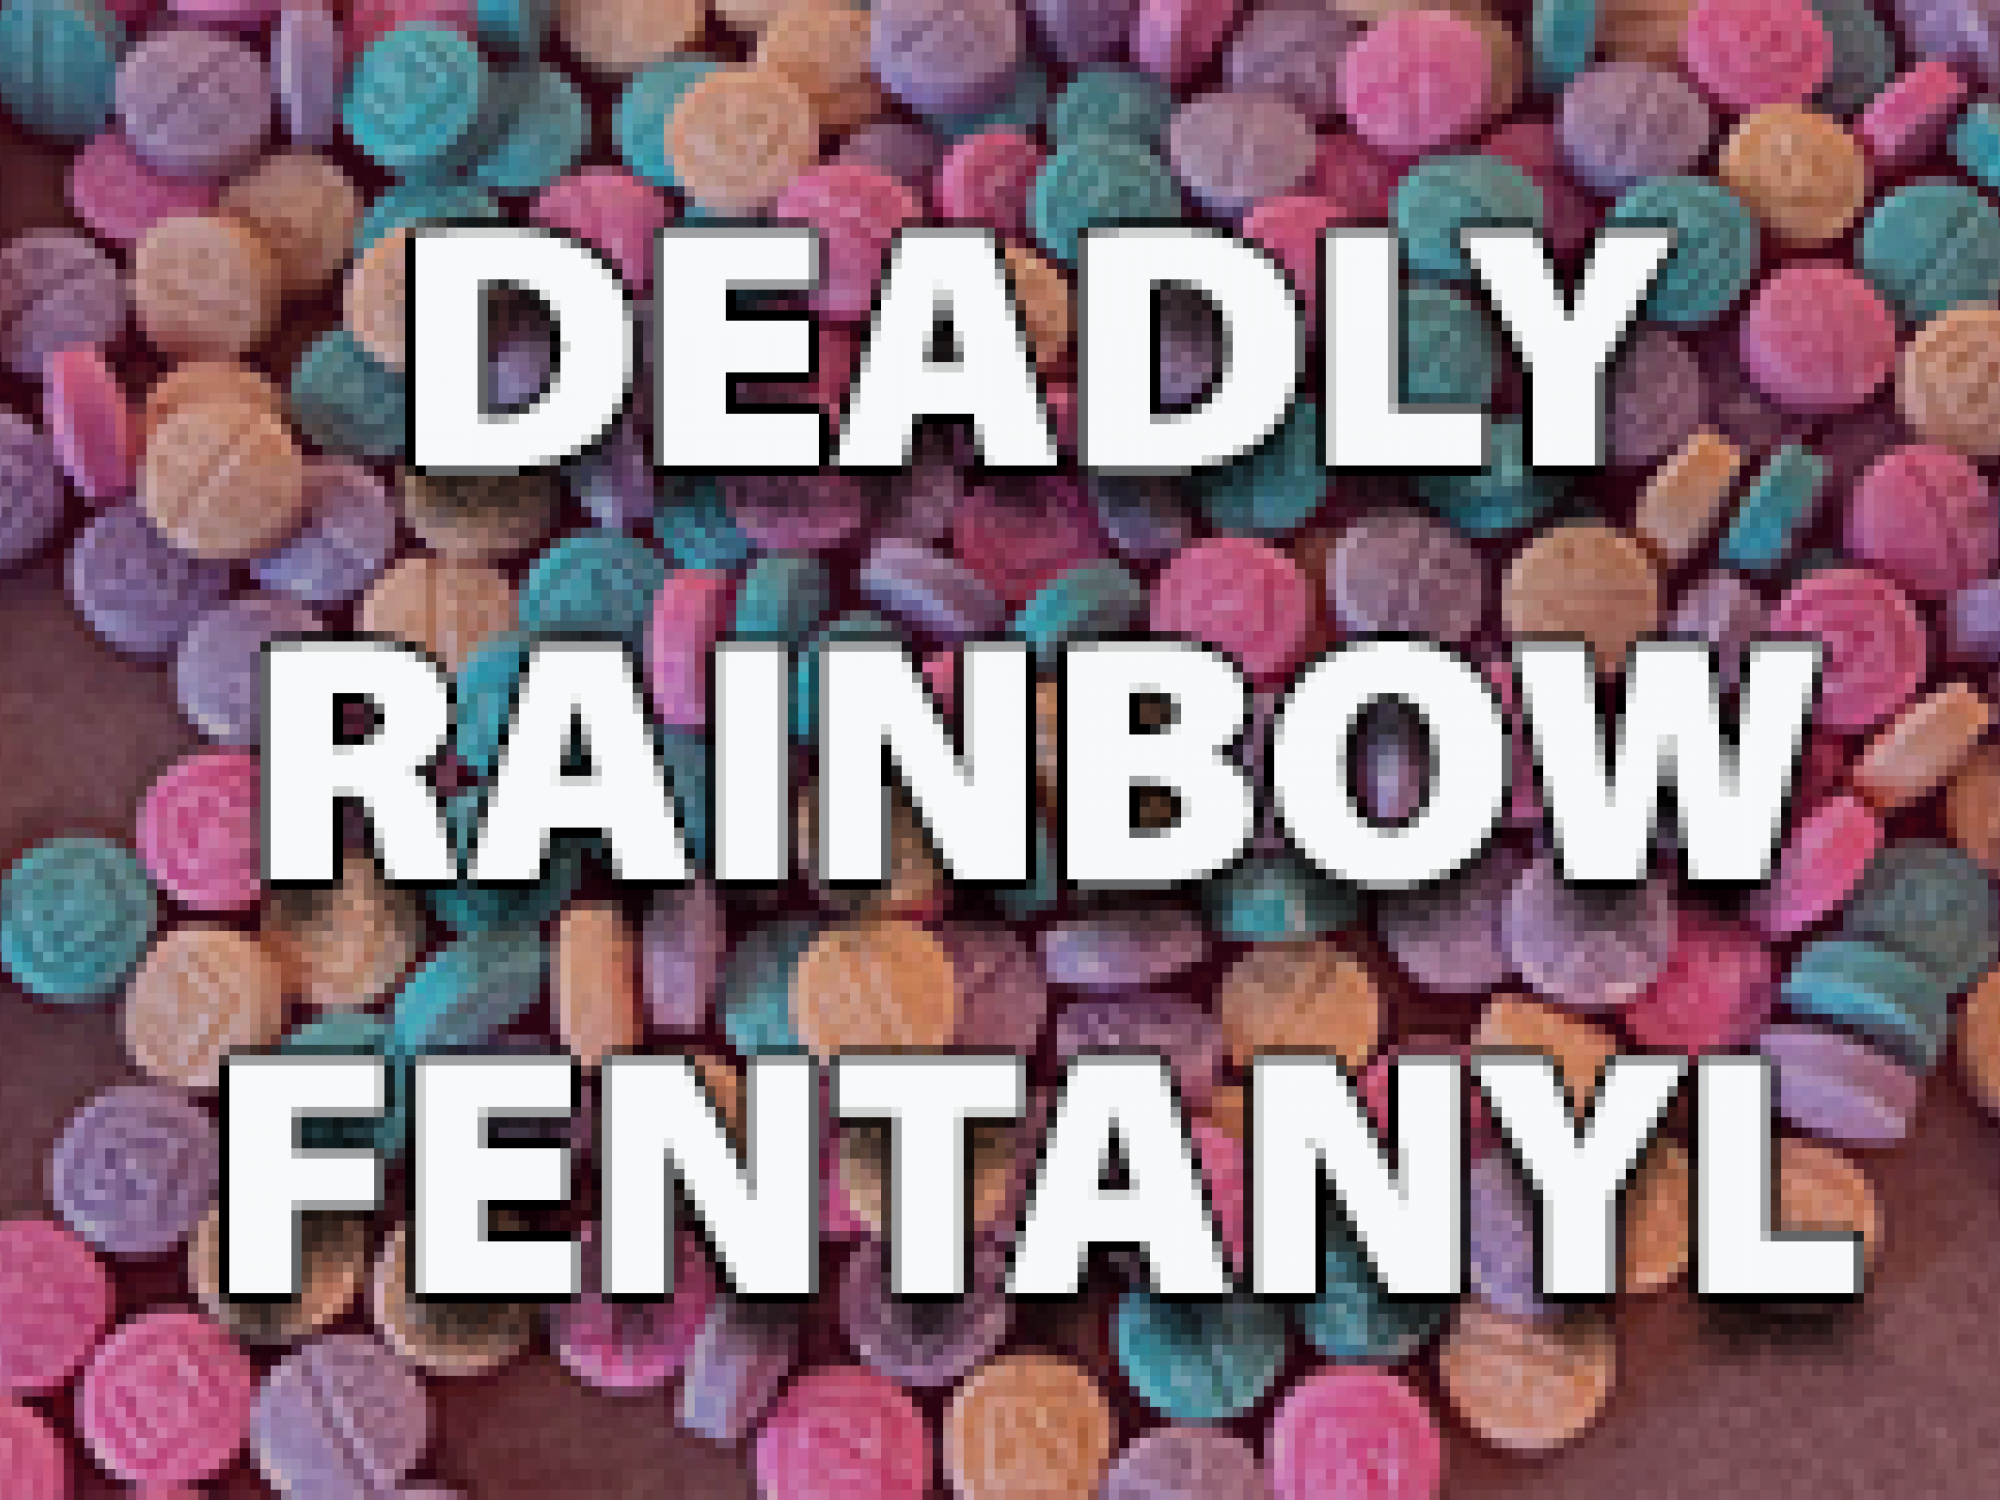 Police issued warning about fentanyl-laced drugs after 2 Eugene